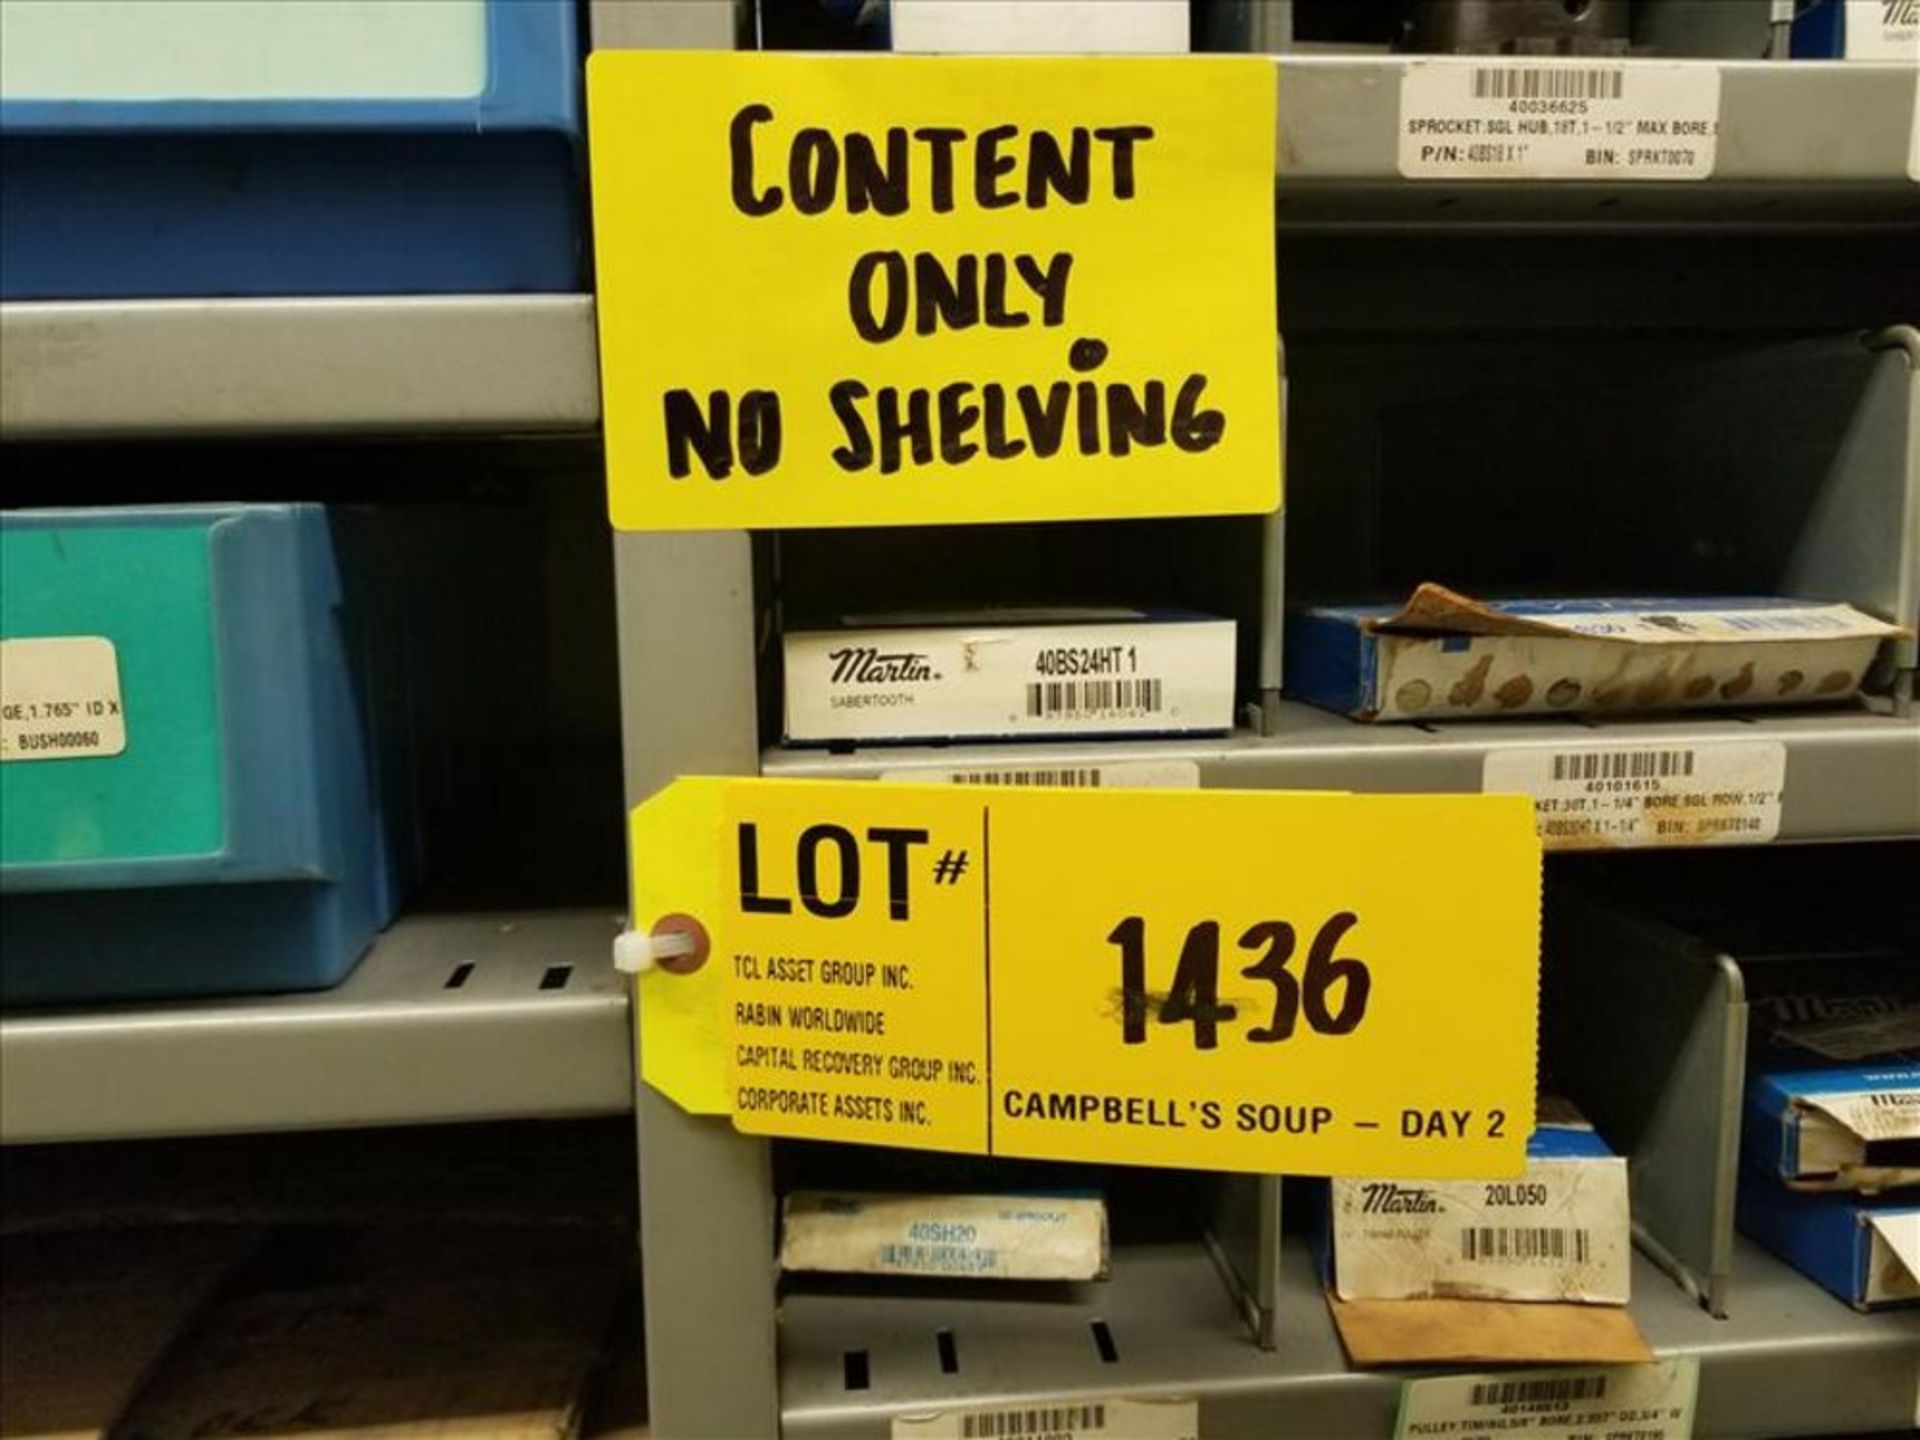 (6) Section Metal Shelving w/ gears, Couplers, Taper Locks (Contents Only)